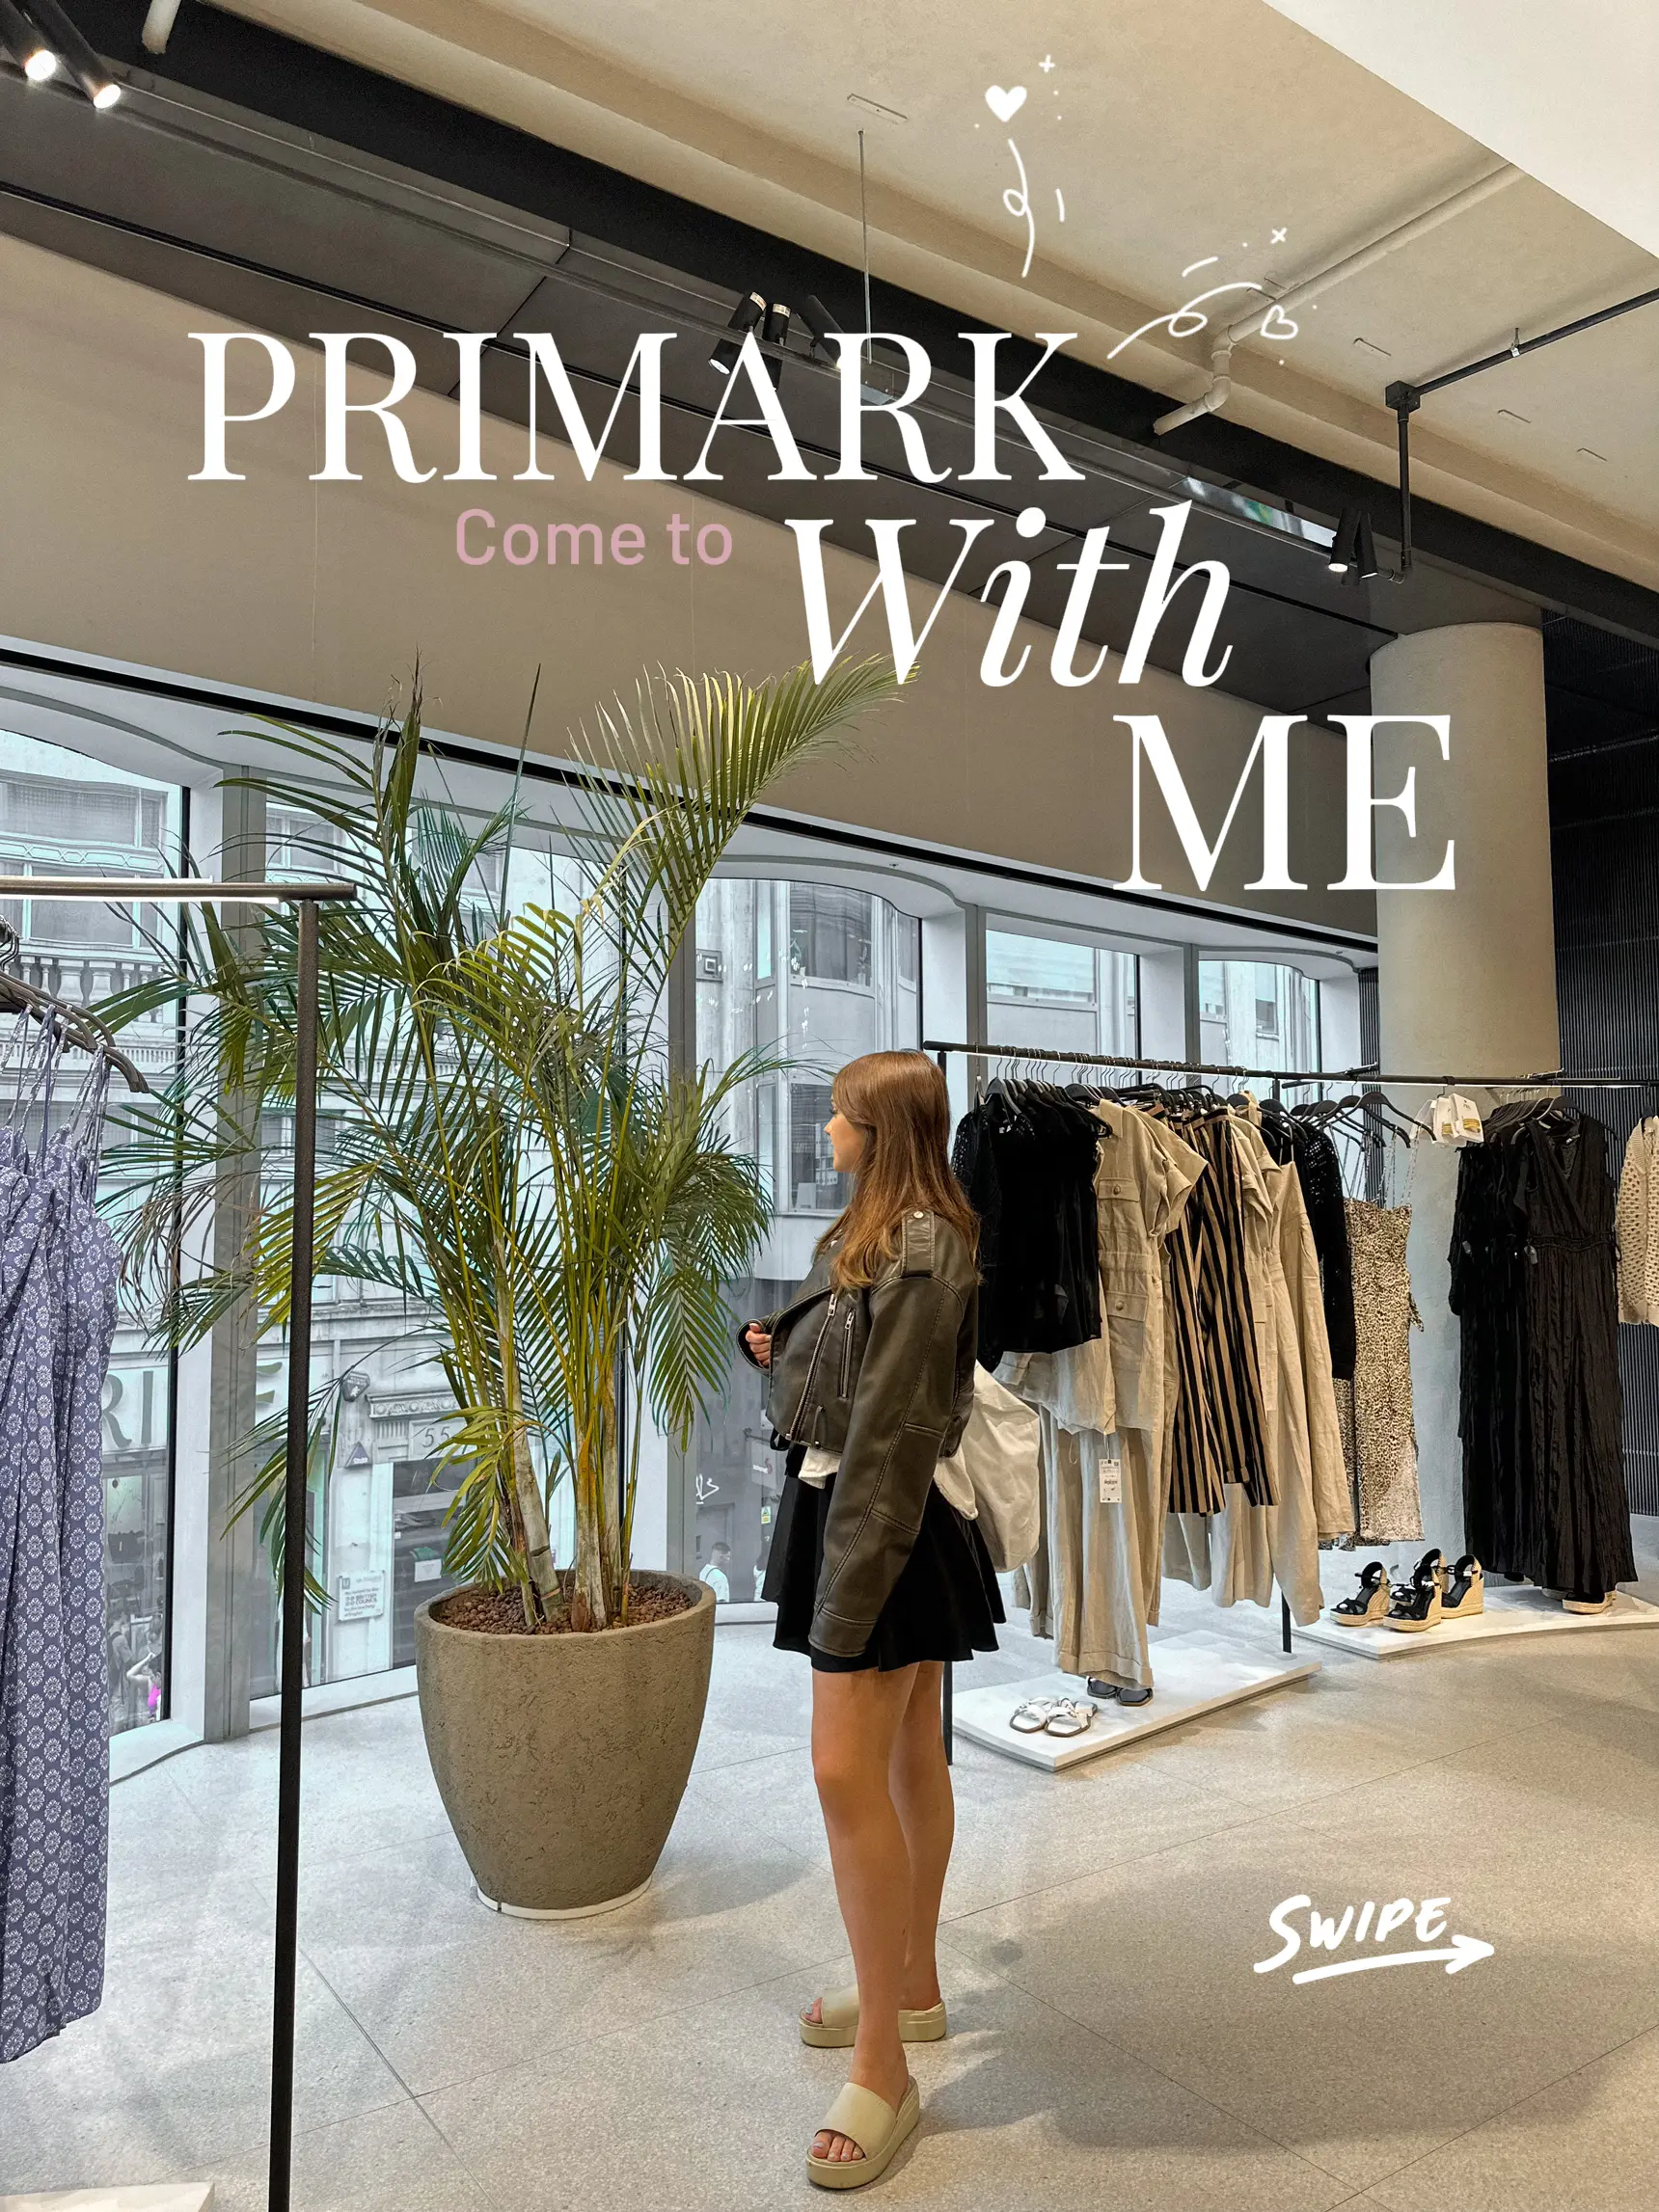 New In Primark Autumn Winter 2021 Haul & Outfit Ideas - Cappuccino and  Fashion